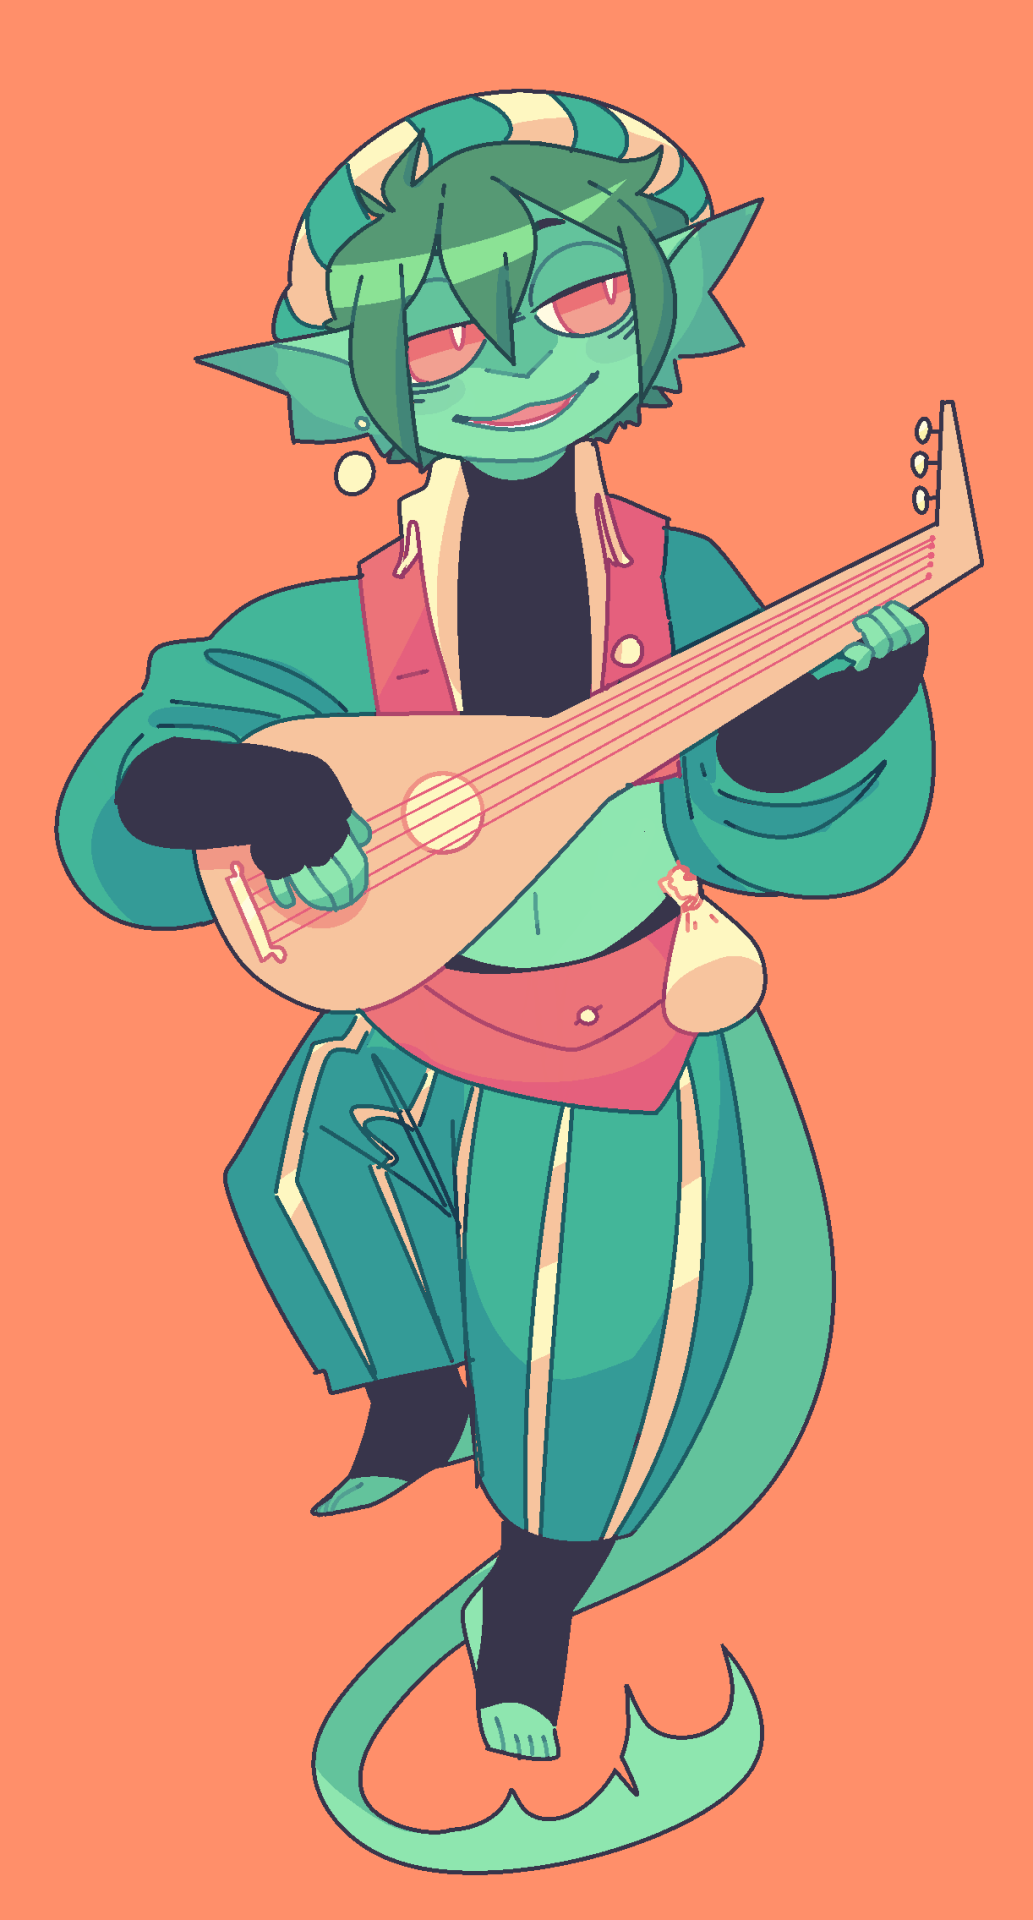 peabug:i made an undine bard for a pathfinder campaign w/ some pals! his name is